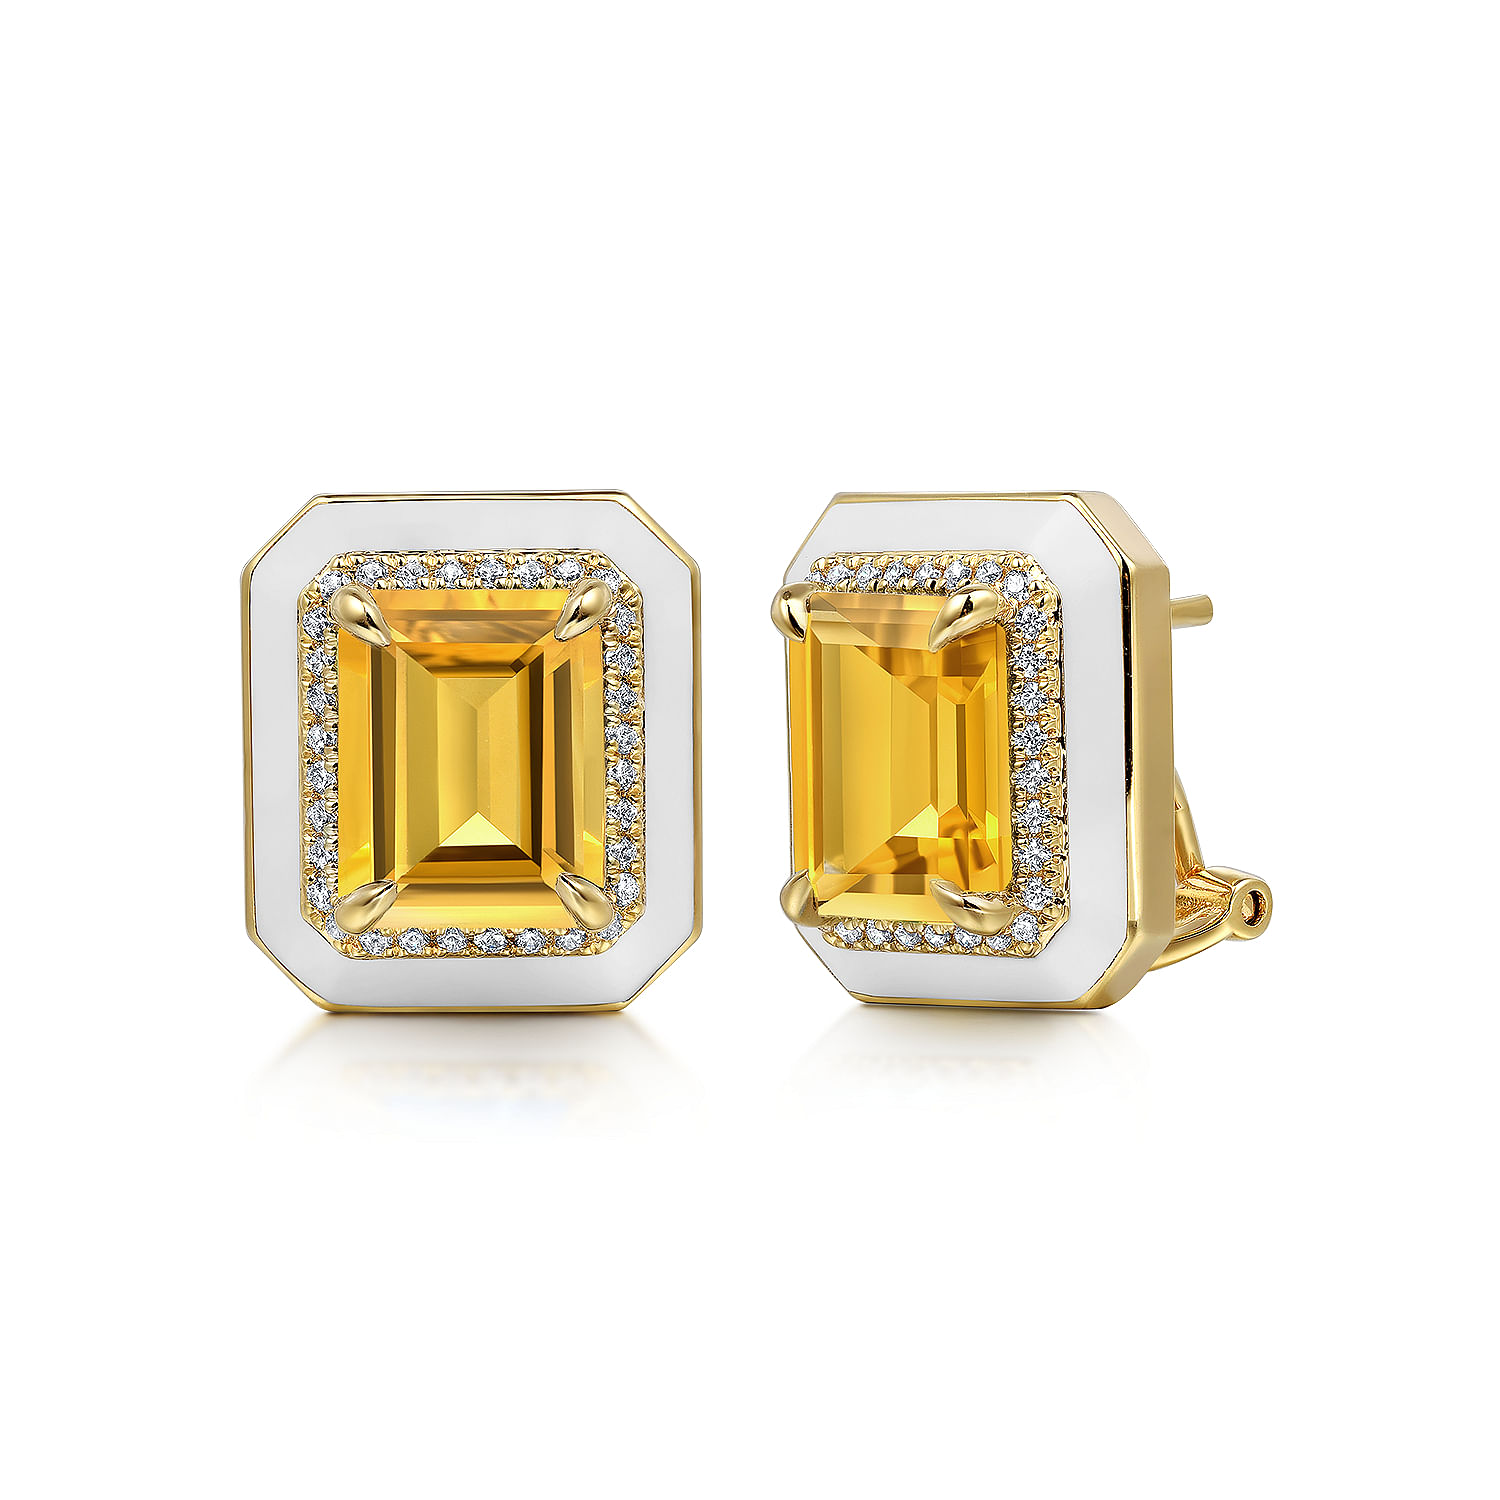 14K Yellow Gold Diamond and Citrine Emerald Cut Earrings With Flower Pattern J-Back and White Enamel